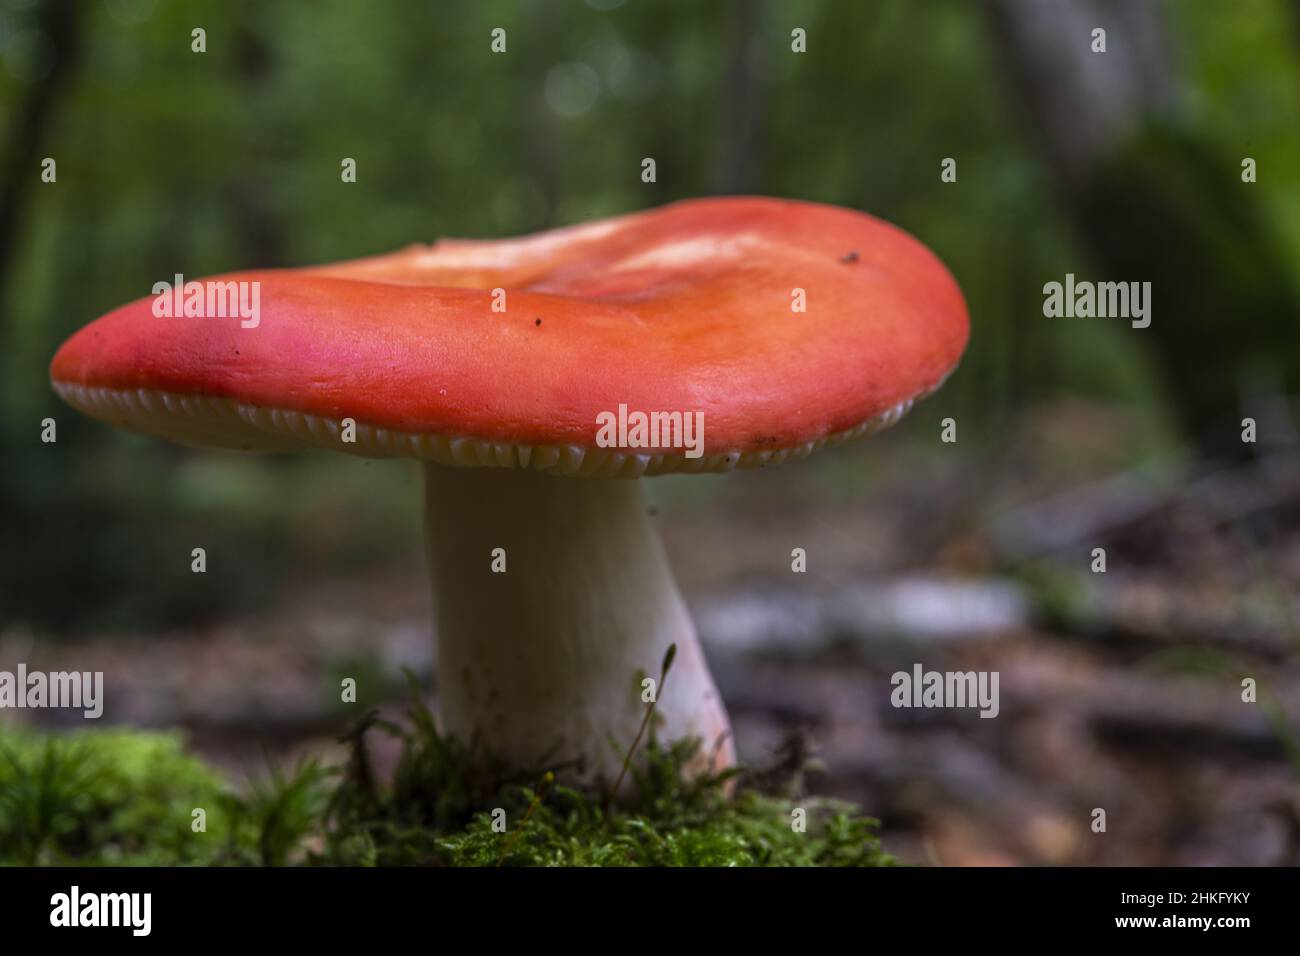 France, Somme, Crécy-en-Ponthieu, Crécy forest, Mushroom, Russula lepida Stock Photo